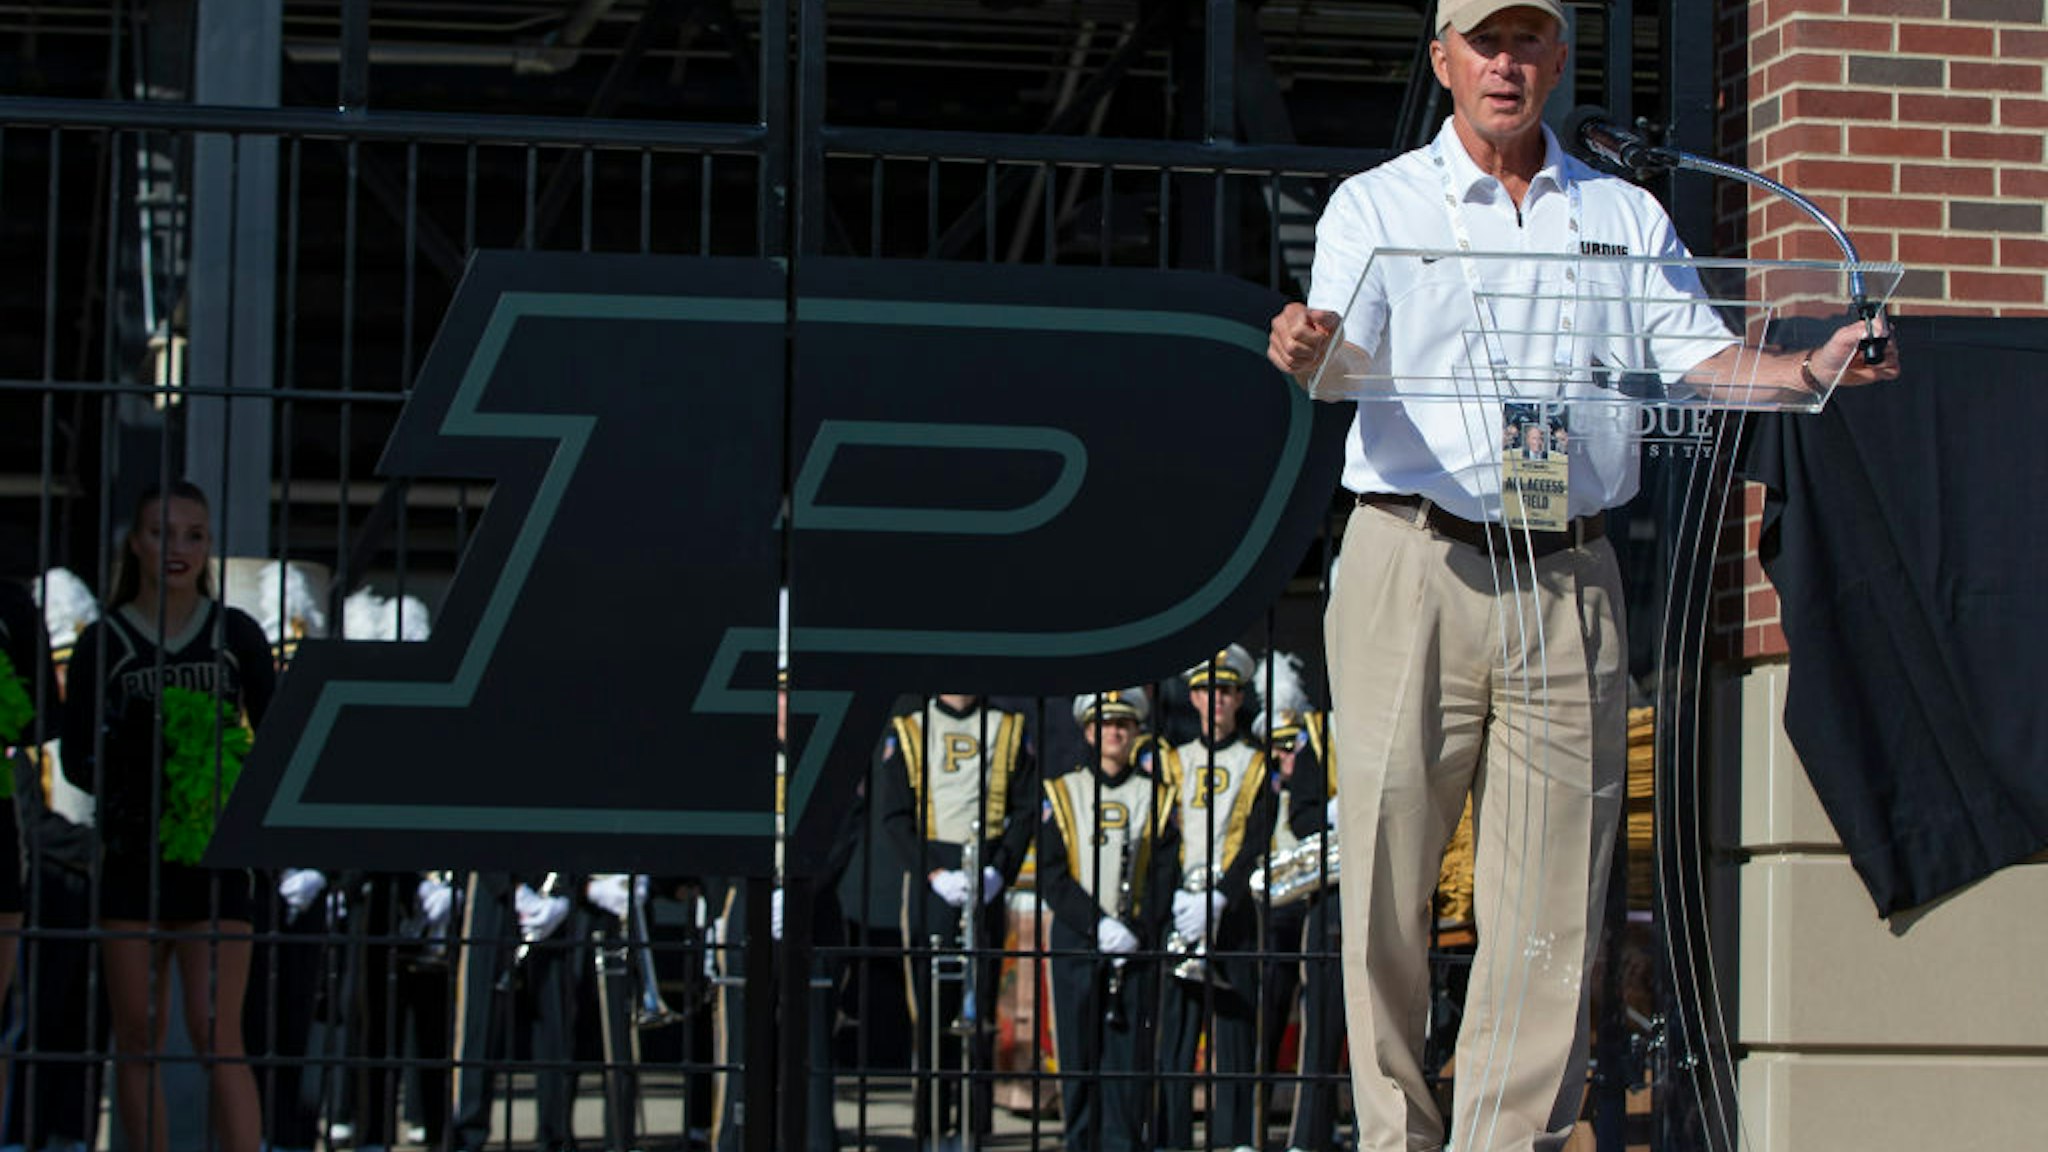 Purdue University President Mitch Daniels is seen before the game against the Vanderbilt Commodores at Ross-Ade Stadium on September 7, 2019 in West Lafayette, Indiana.